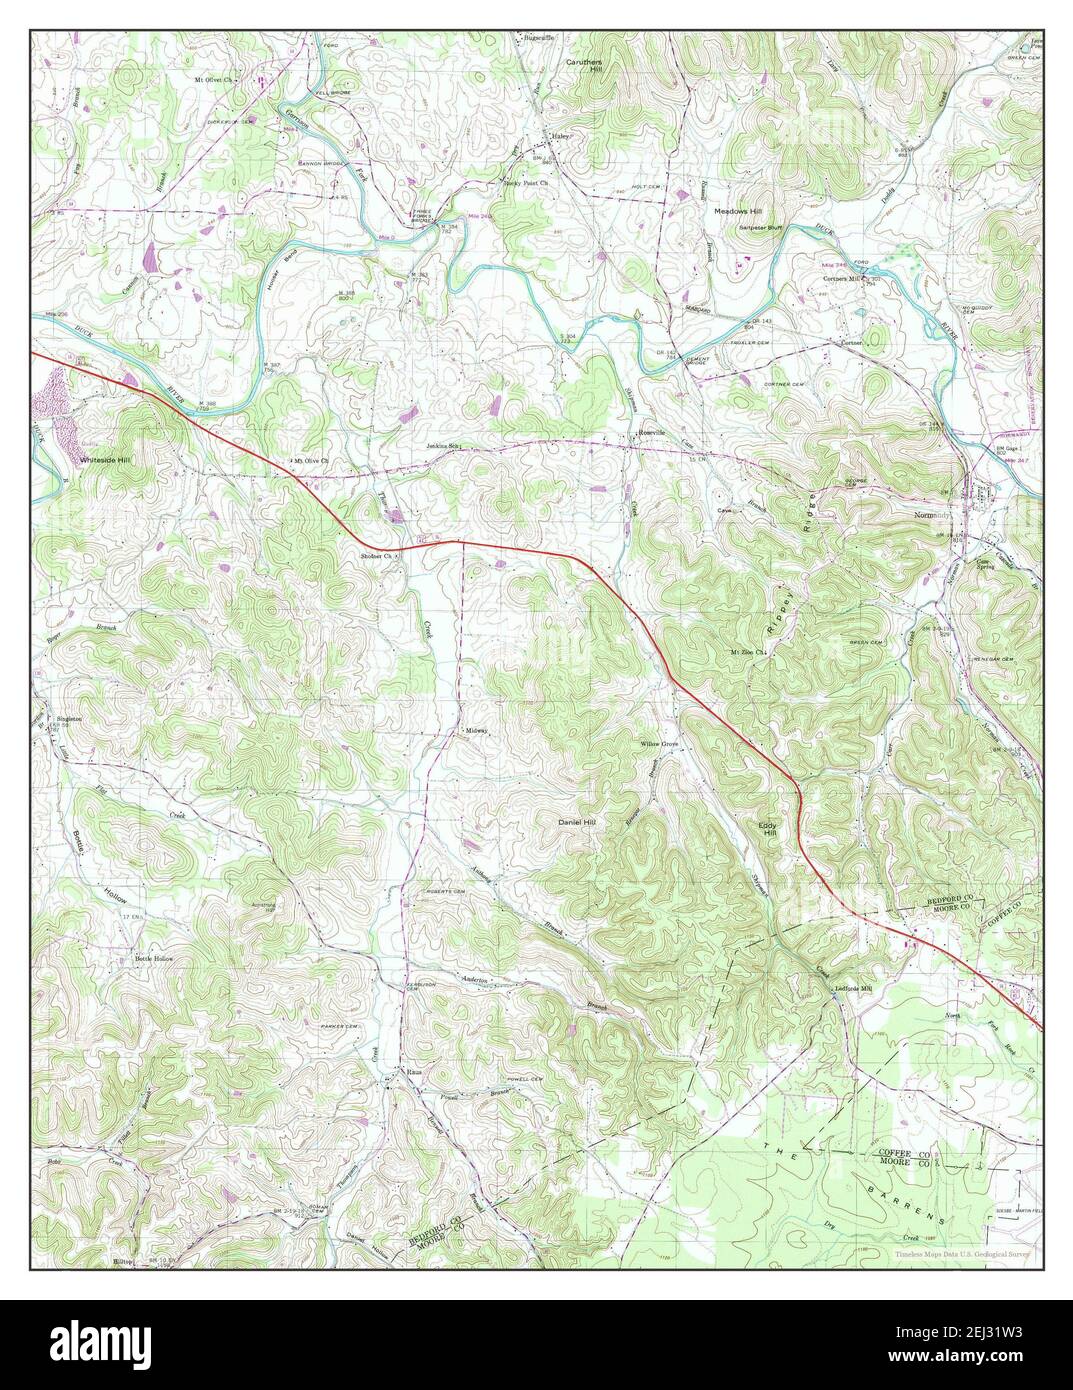 Normandy, Tennessee, map 1947, 1:24000, United States of America by Timeless Maps, data U.S. Geological Survey Stock Photo